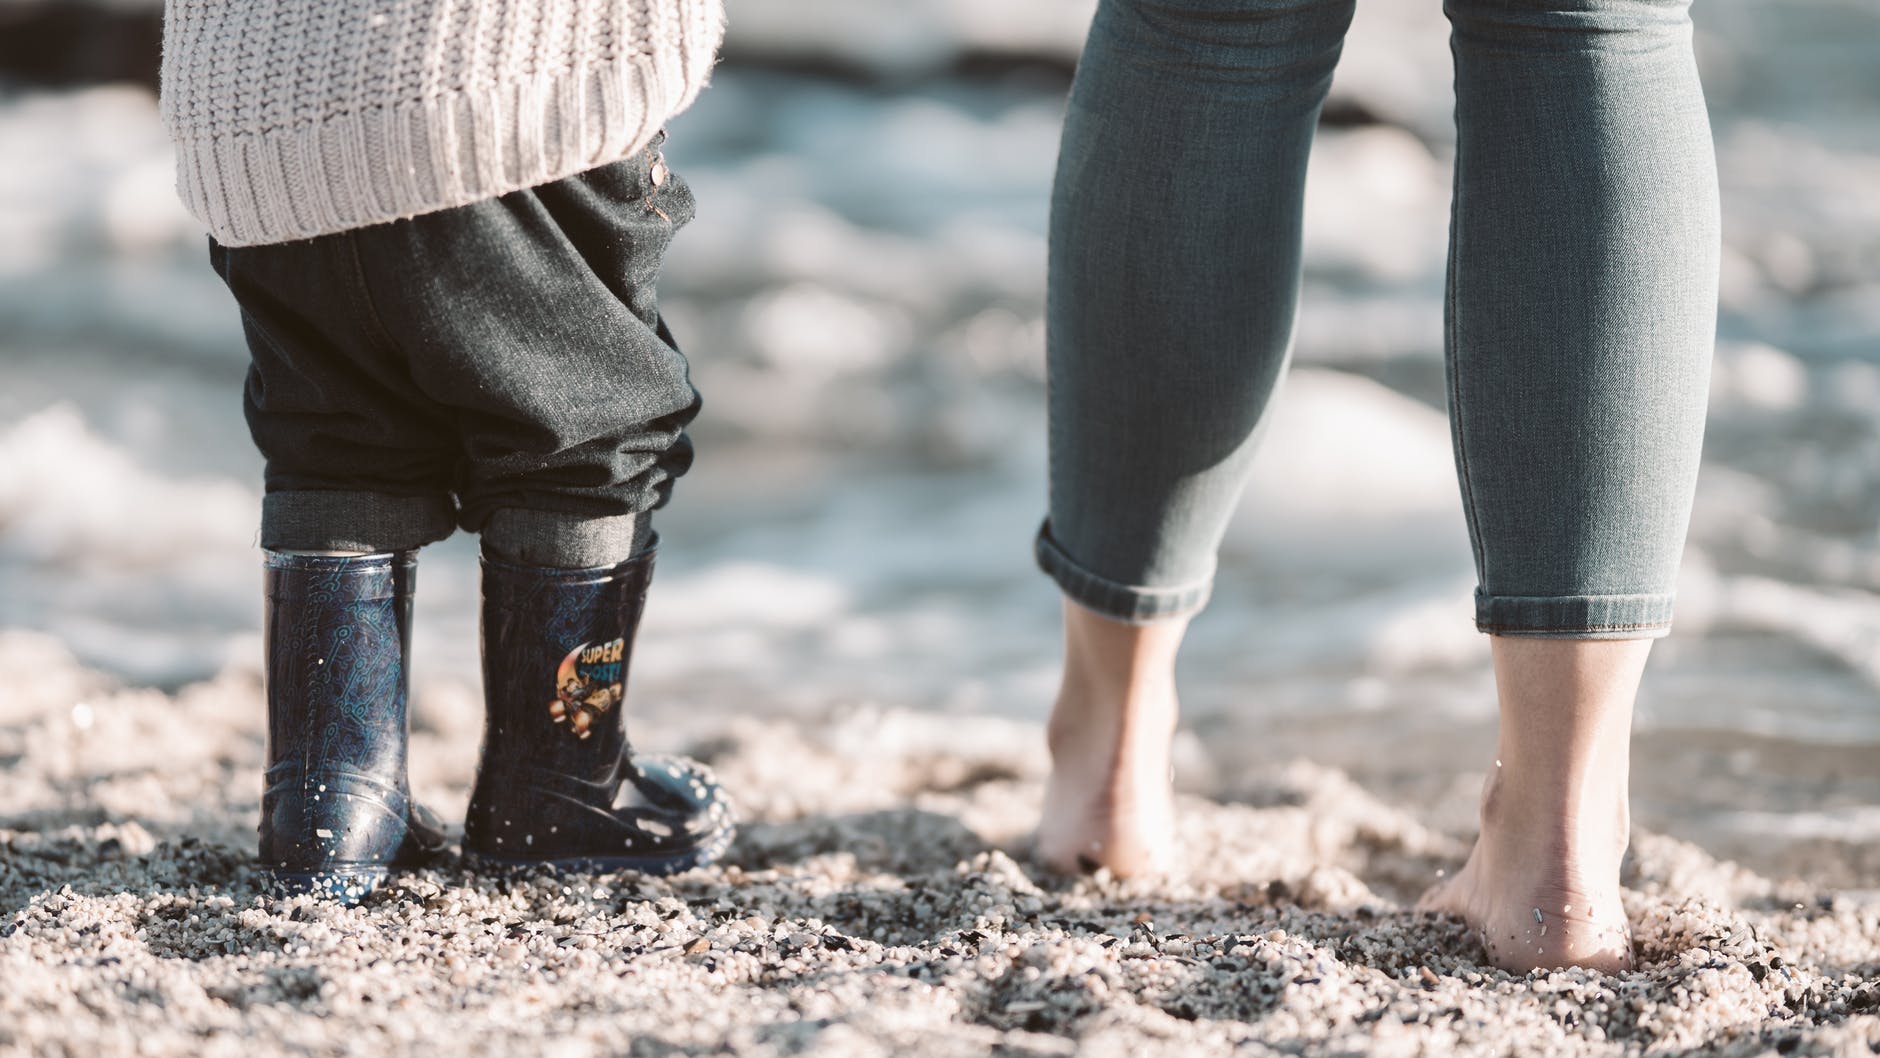 photo of adult barefoot and child on beach in wellies with thick pants on. Sea is in the background.